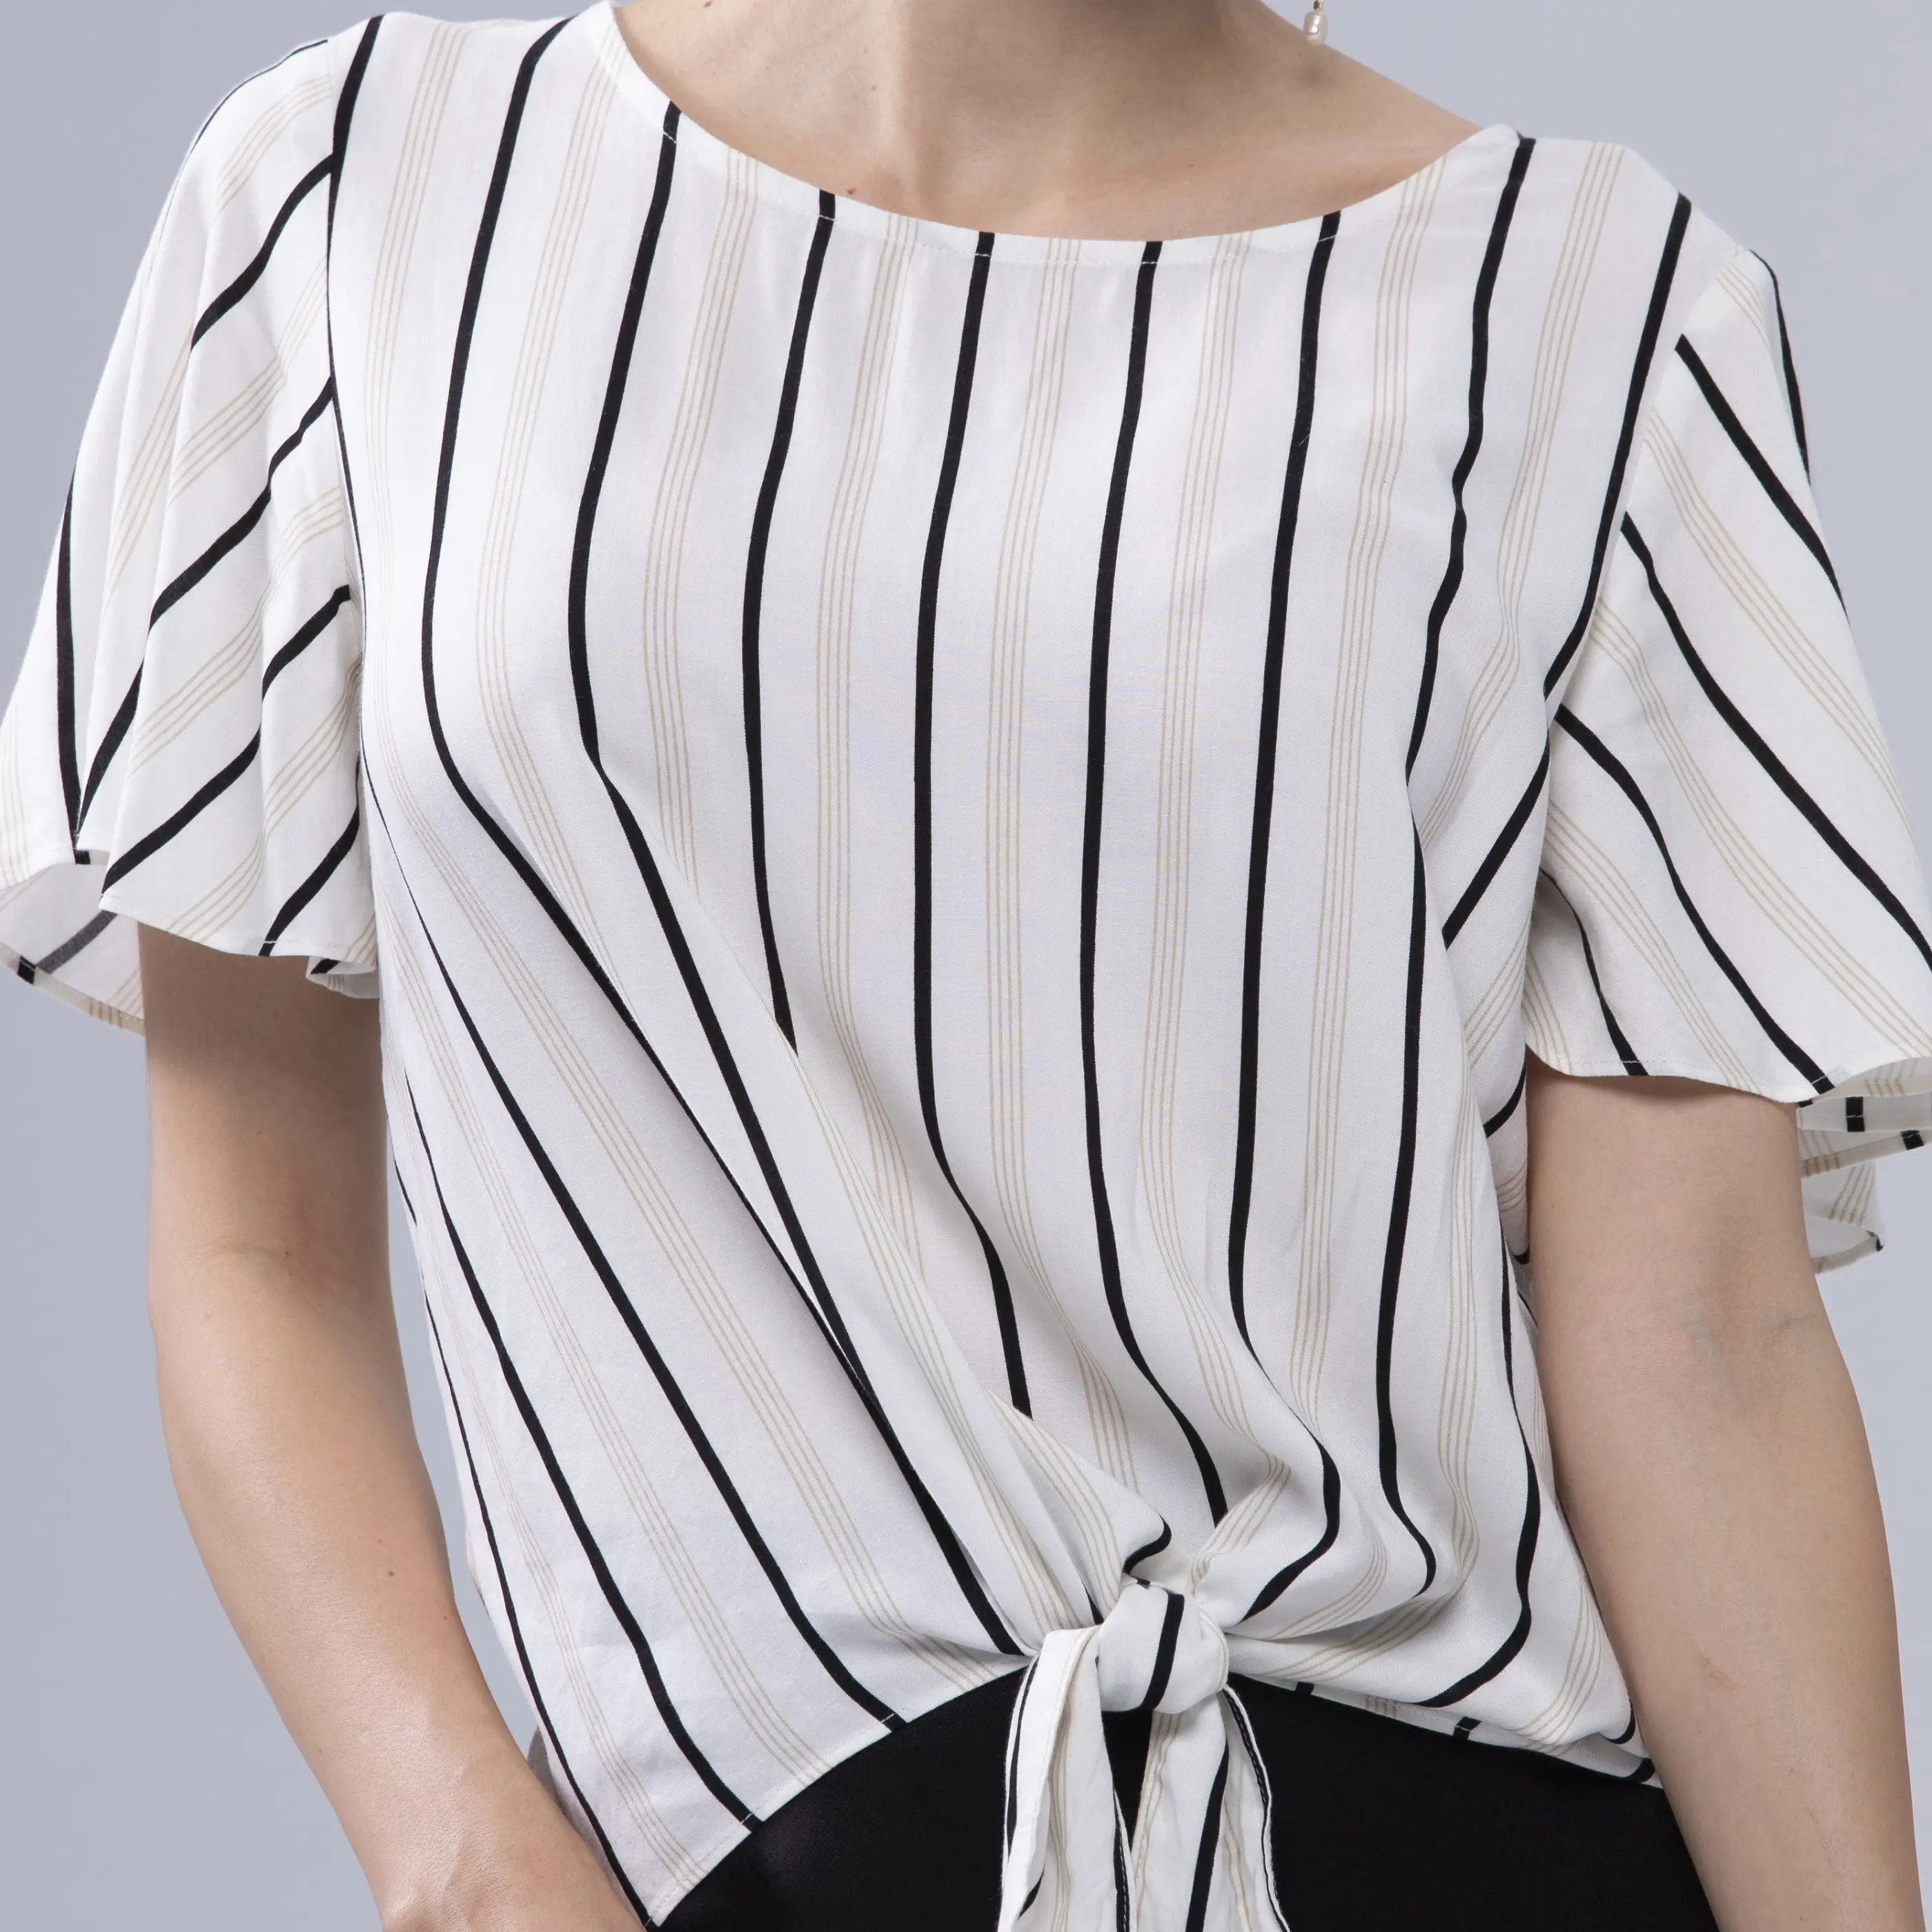 Fashion Casual White Black Striped Short Sleeve Summer Shirts Top Blouses for Women